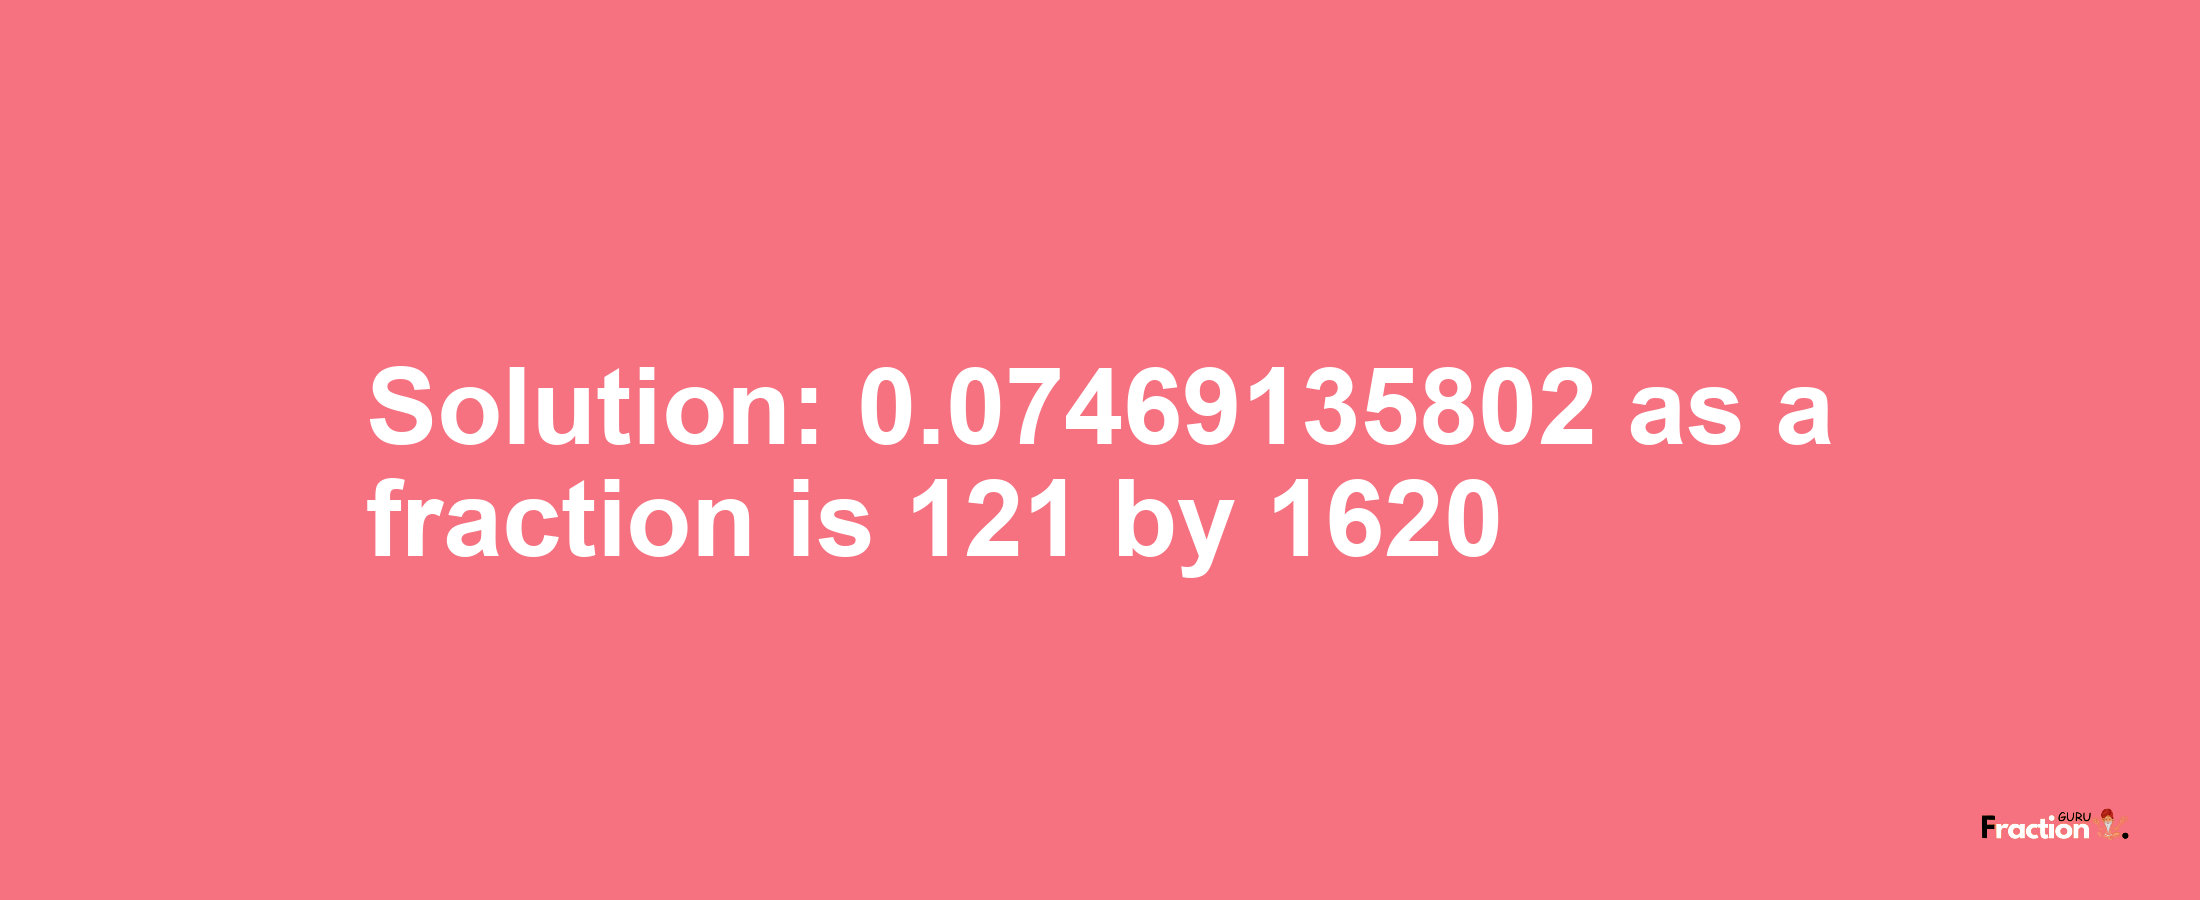 Solution:0.07469135802 as a fraction is 121/1620